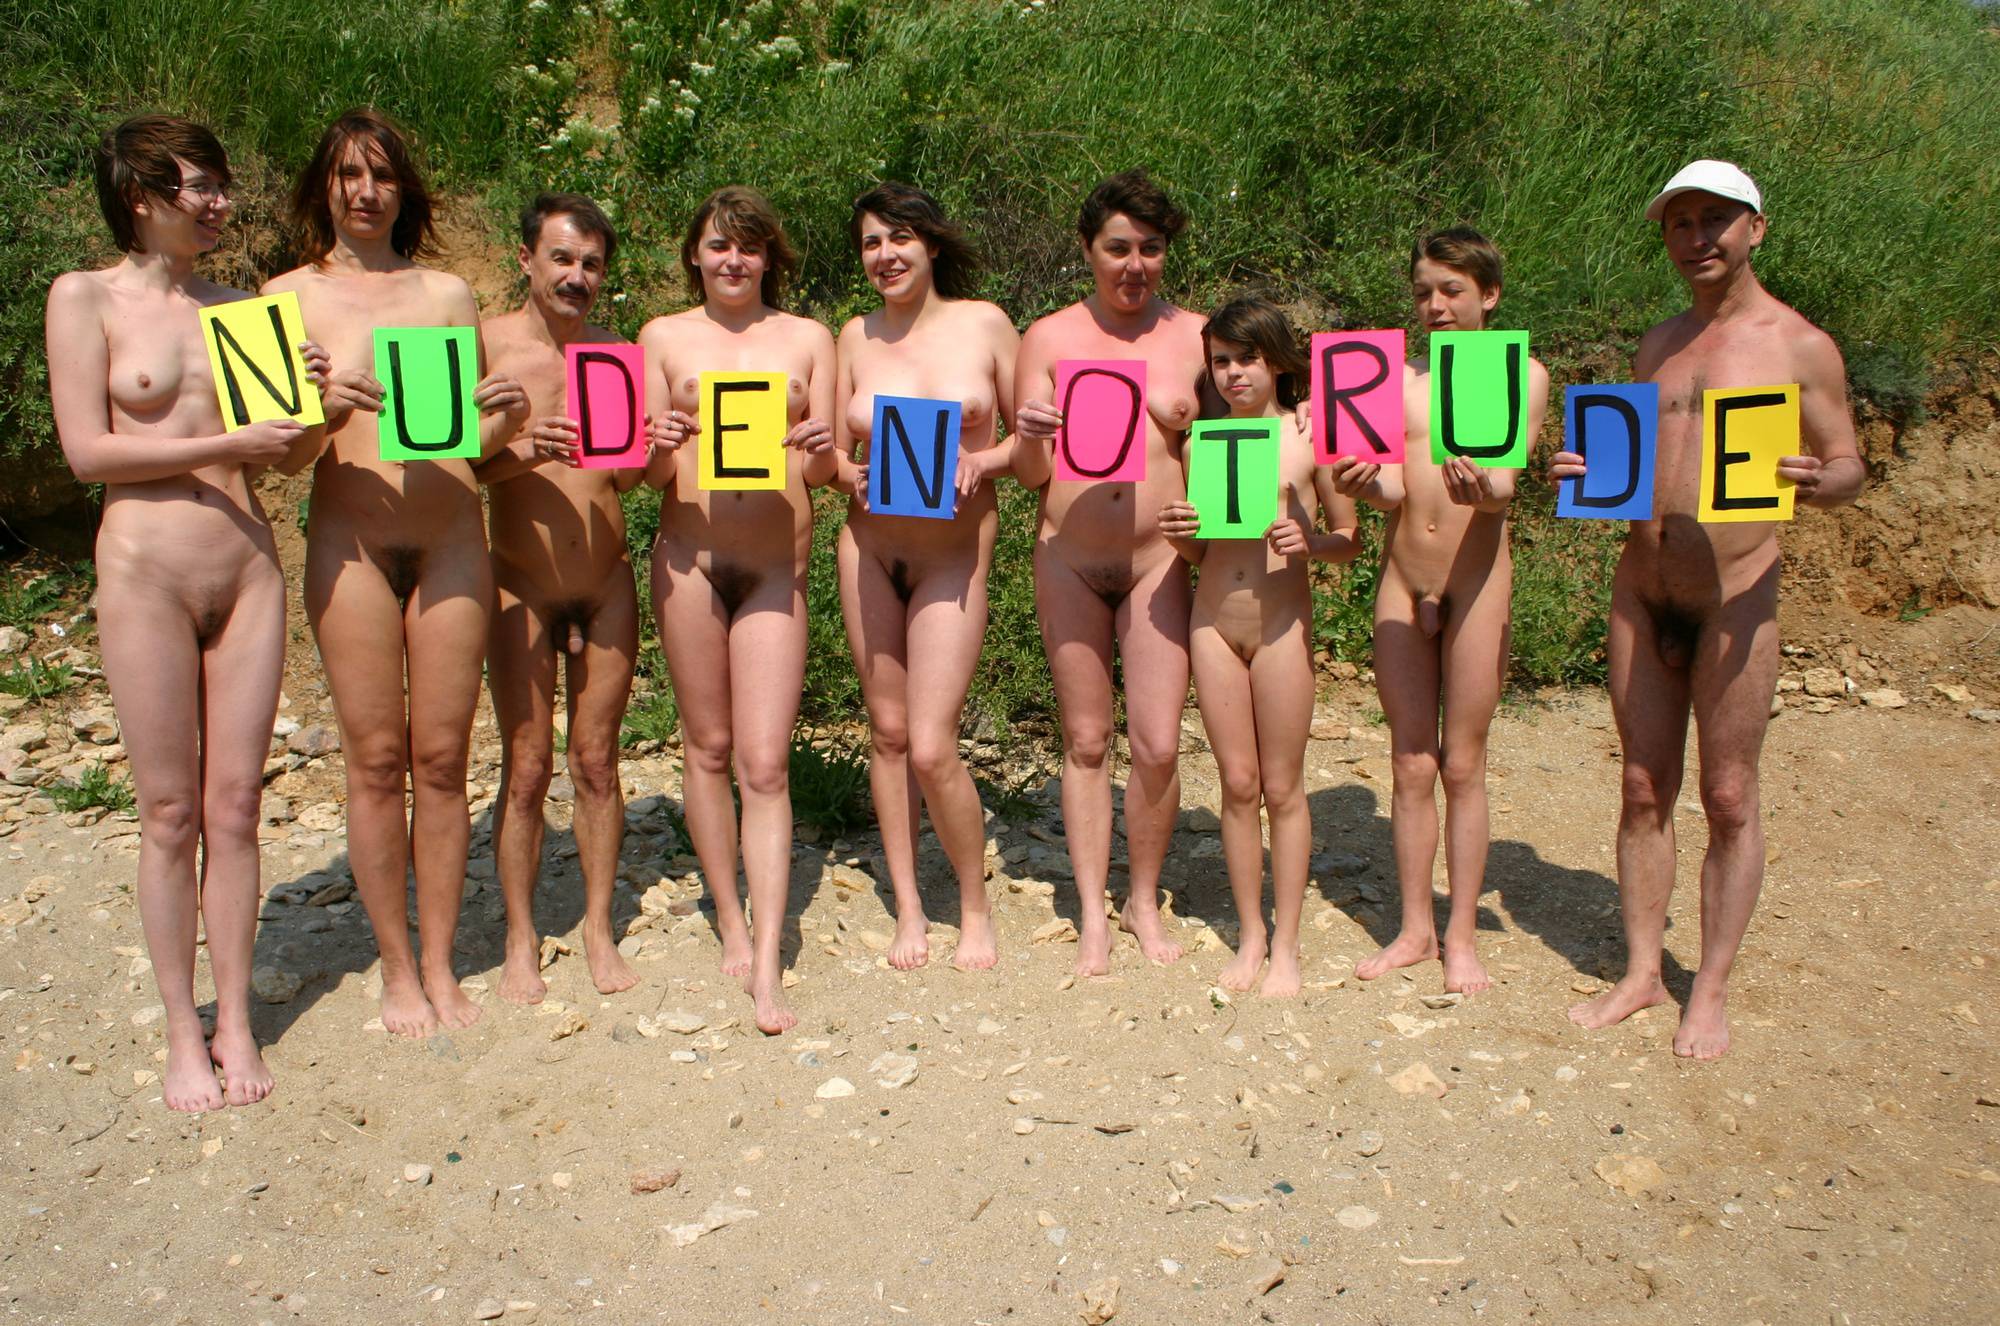 Pure Nudism Photos - Nudist Letters and Logos - 1